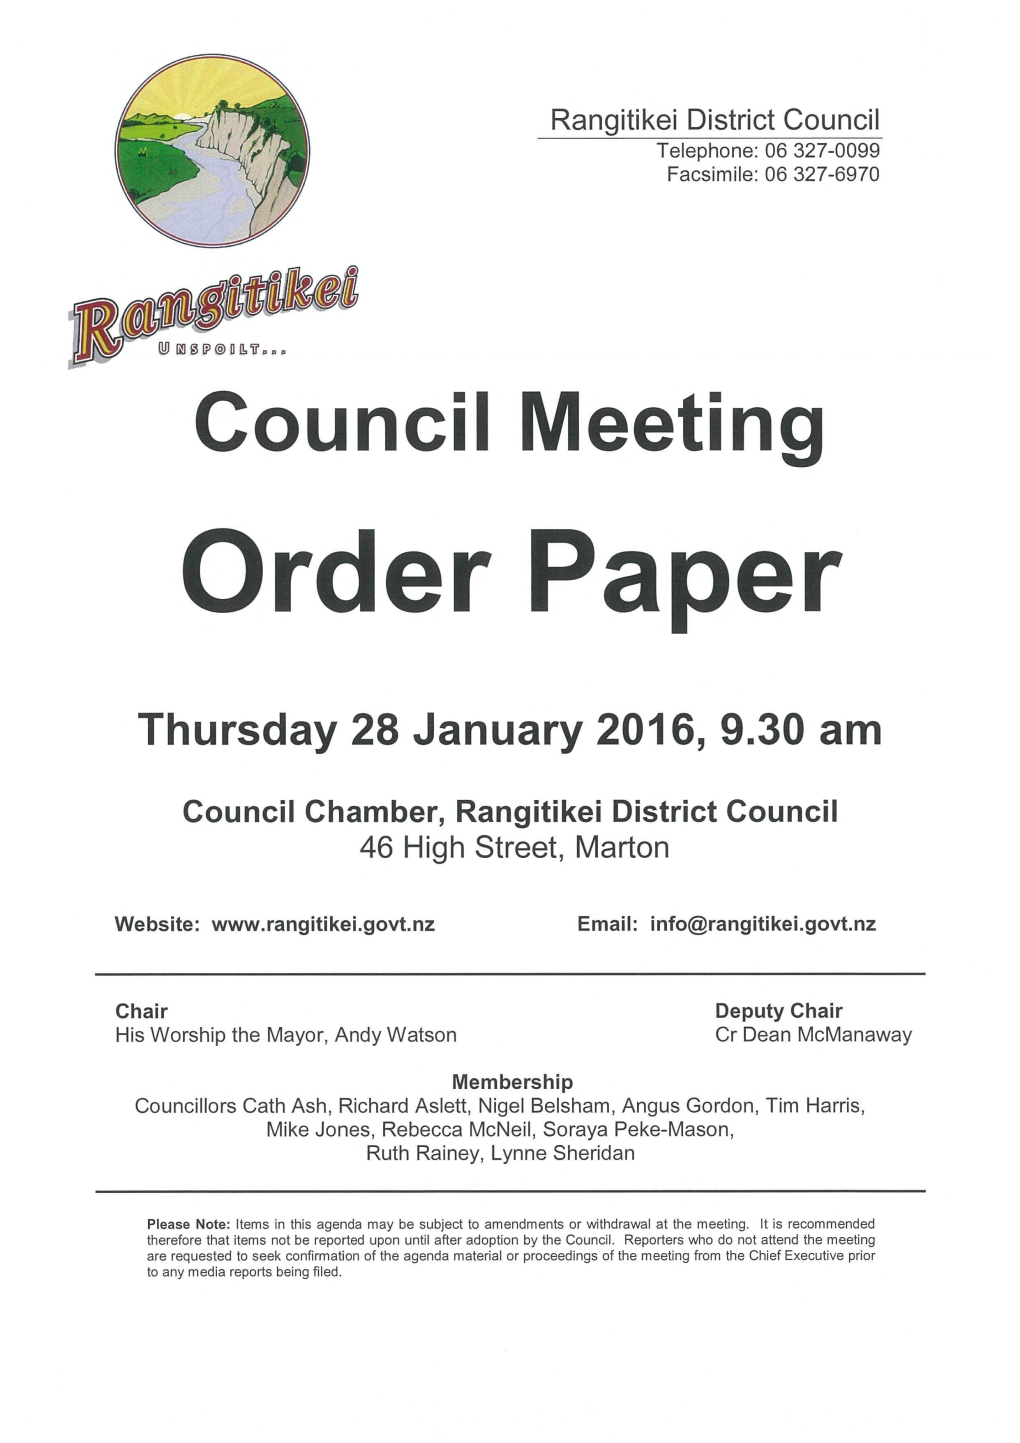 Council Order Paper 28 January 16